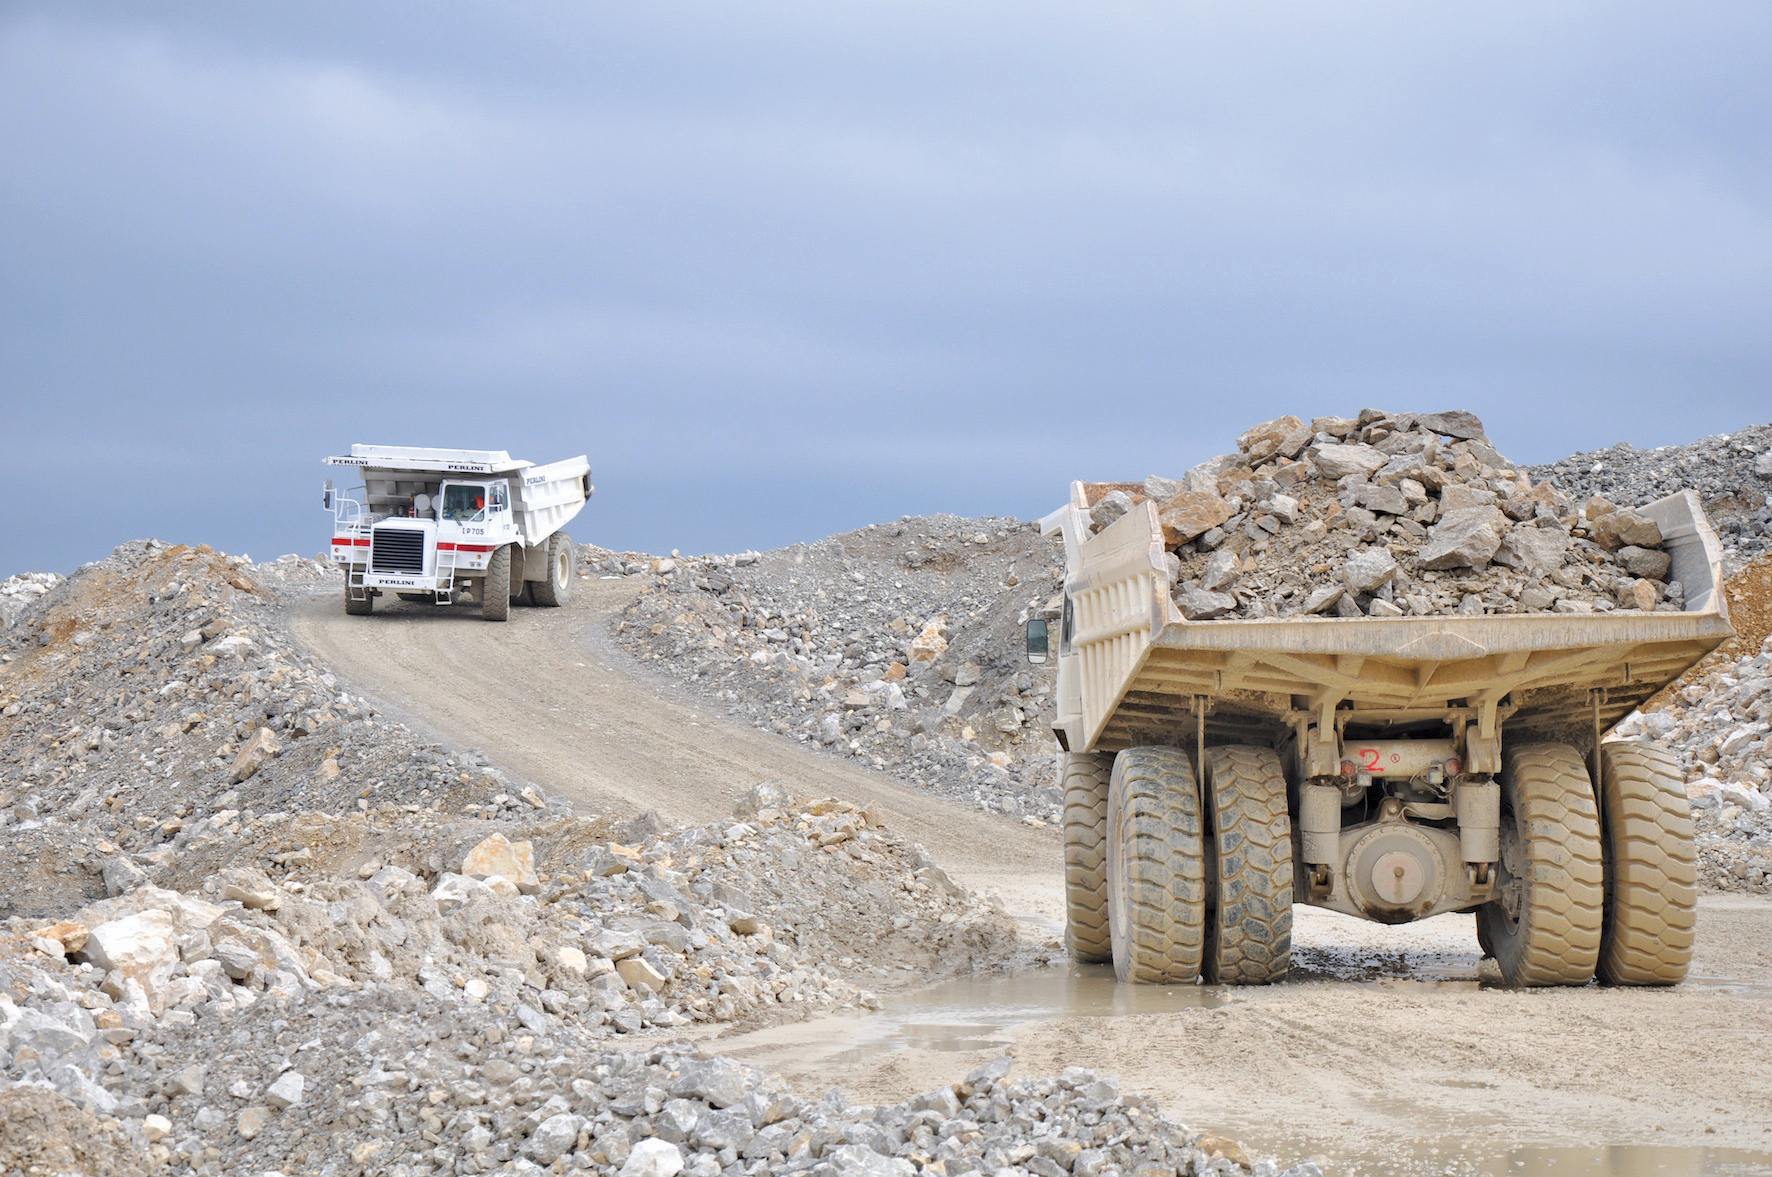 The Perlini dumpers transport around 55tonnes every journey